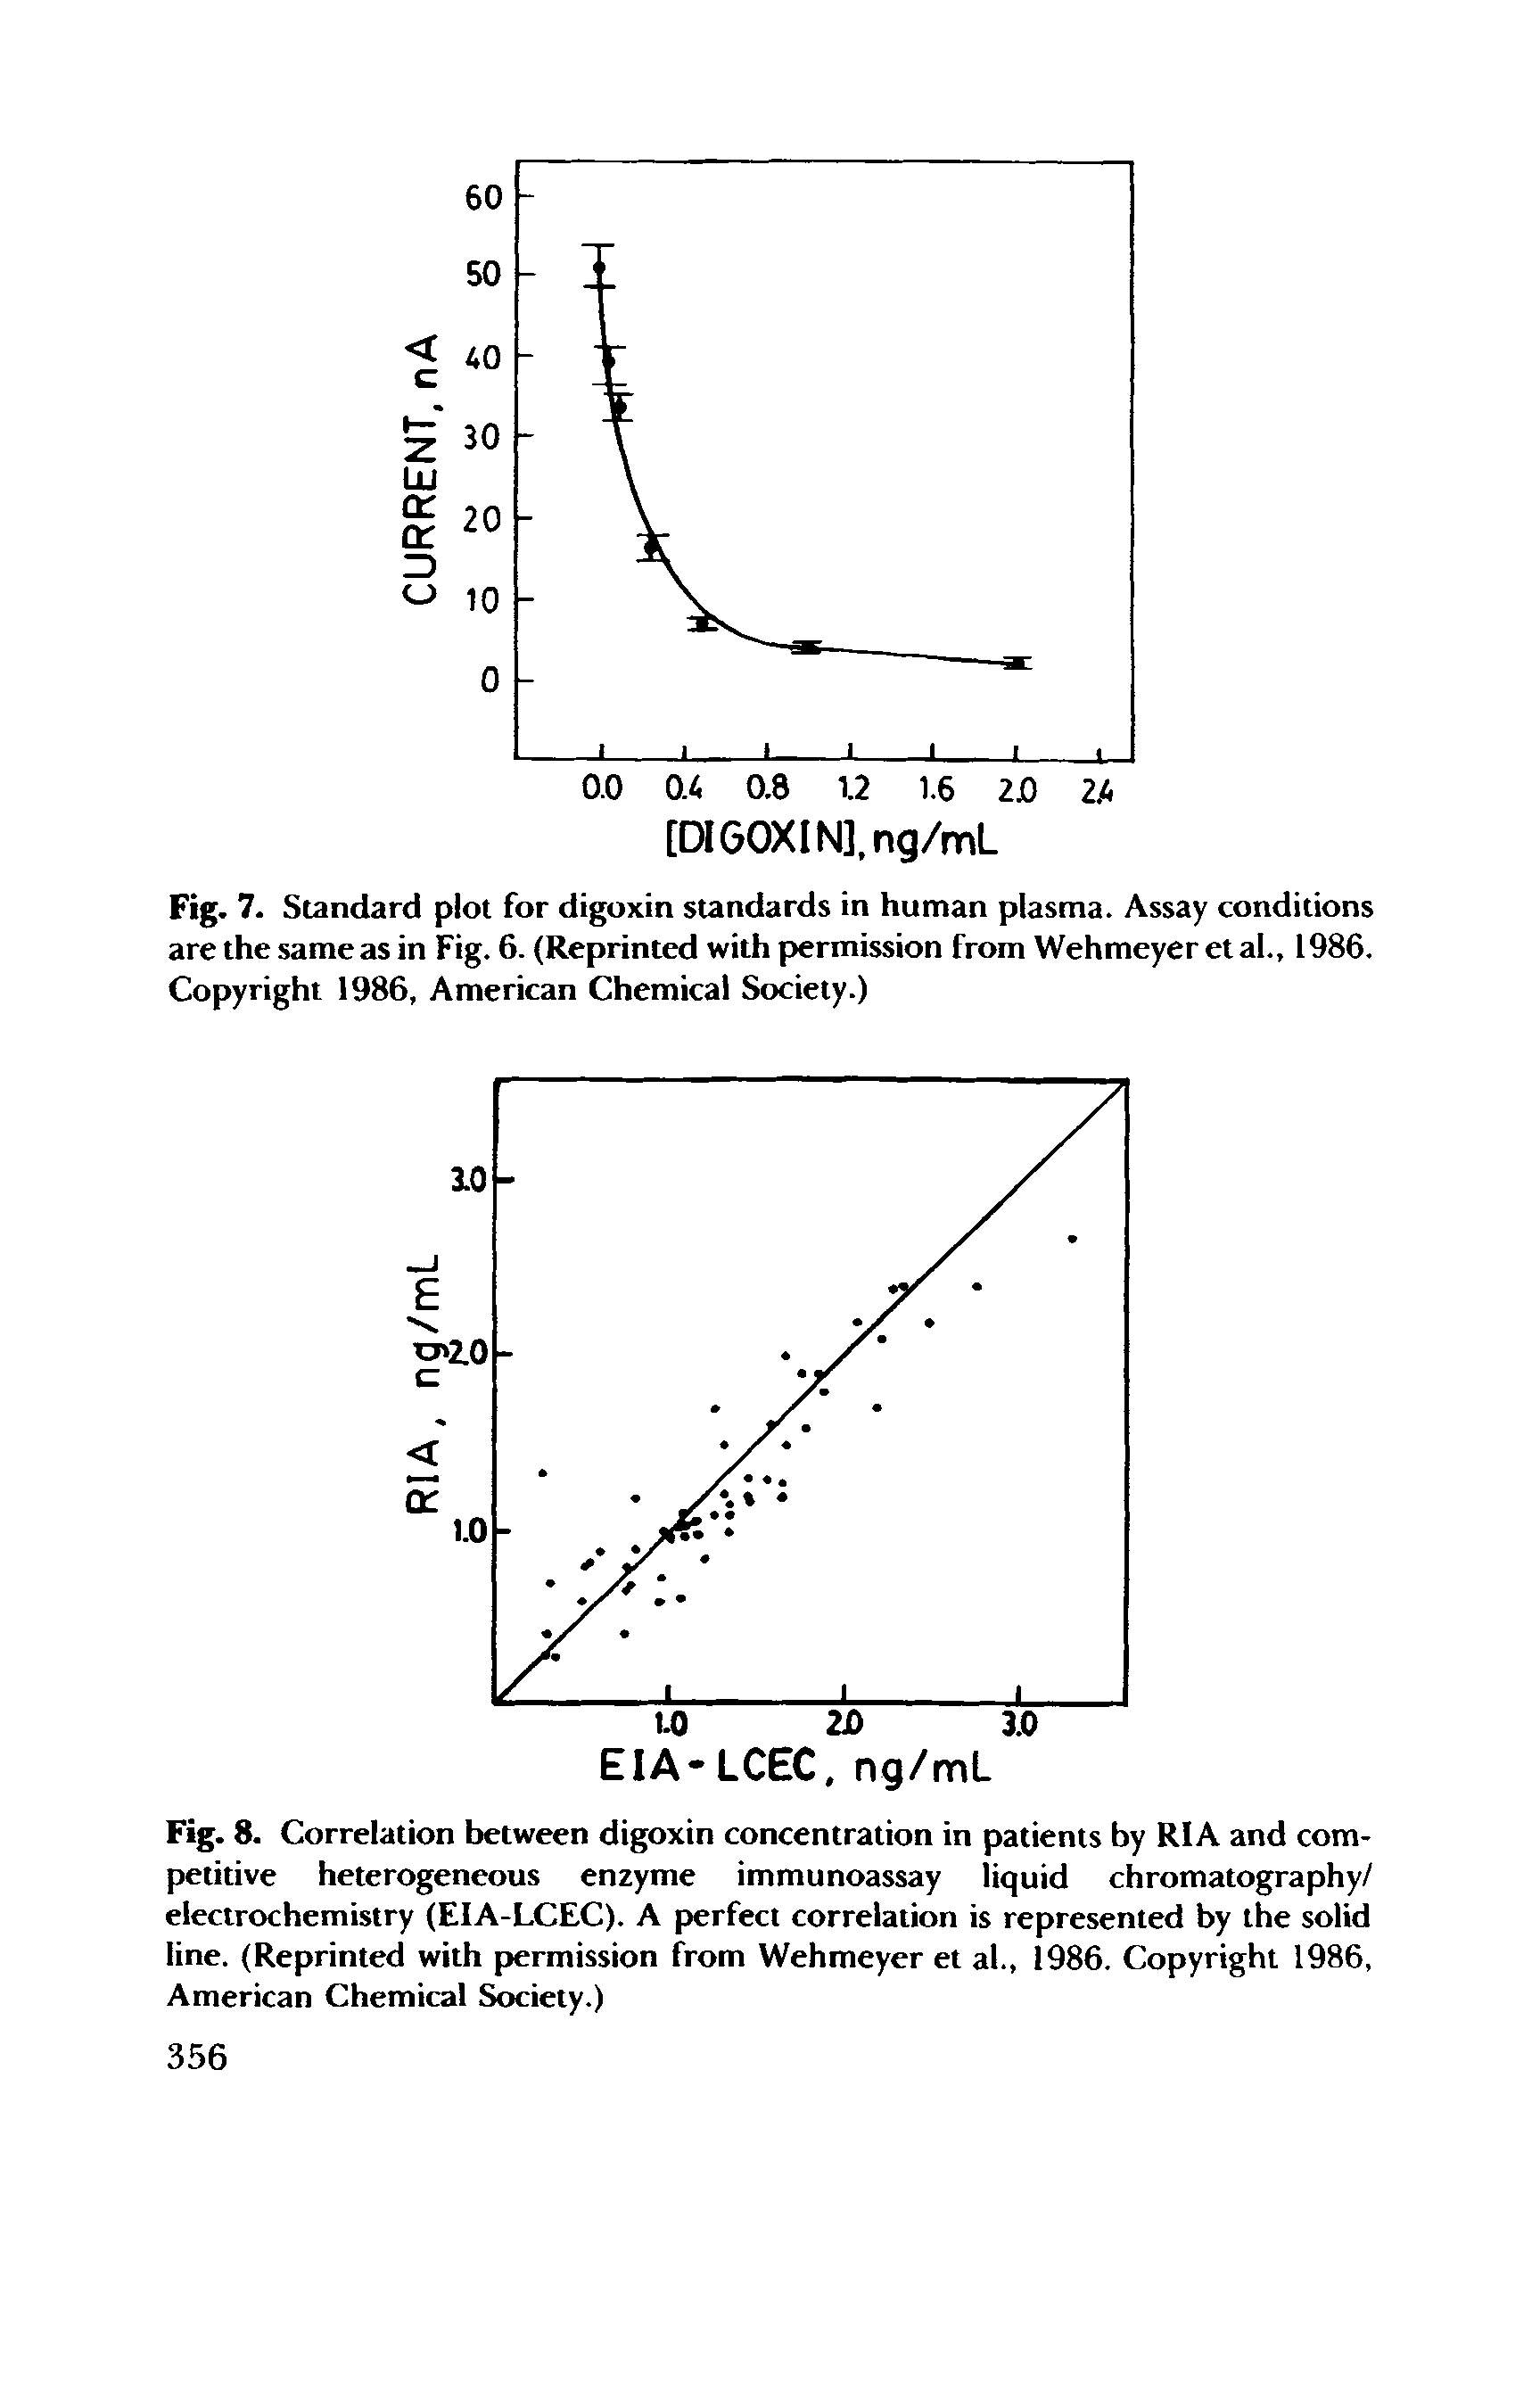 Fig. 8. Correlation between digoxin concentration in patients by RIA and competitive heterogeneous enzyme immunoassay liquid chromatography/ electrochemistry (EIA-LCEC). A perfect correlation is represented by the solid line. (Reprinted with permission from Wehmeyer et al., 1986. Copyright 1986, American Chemical Society.)...